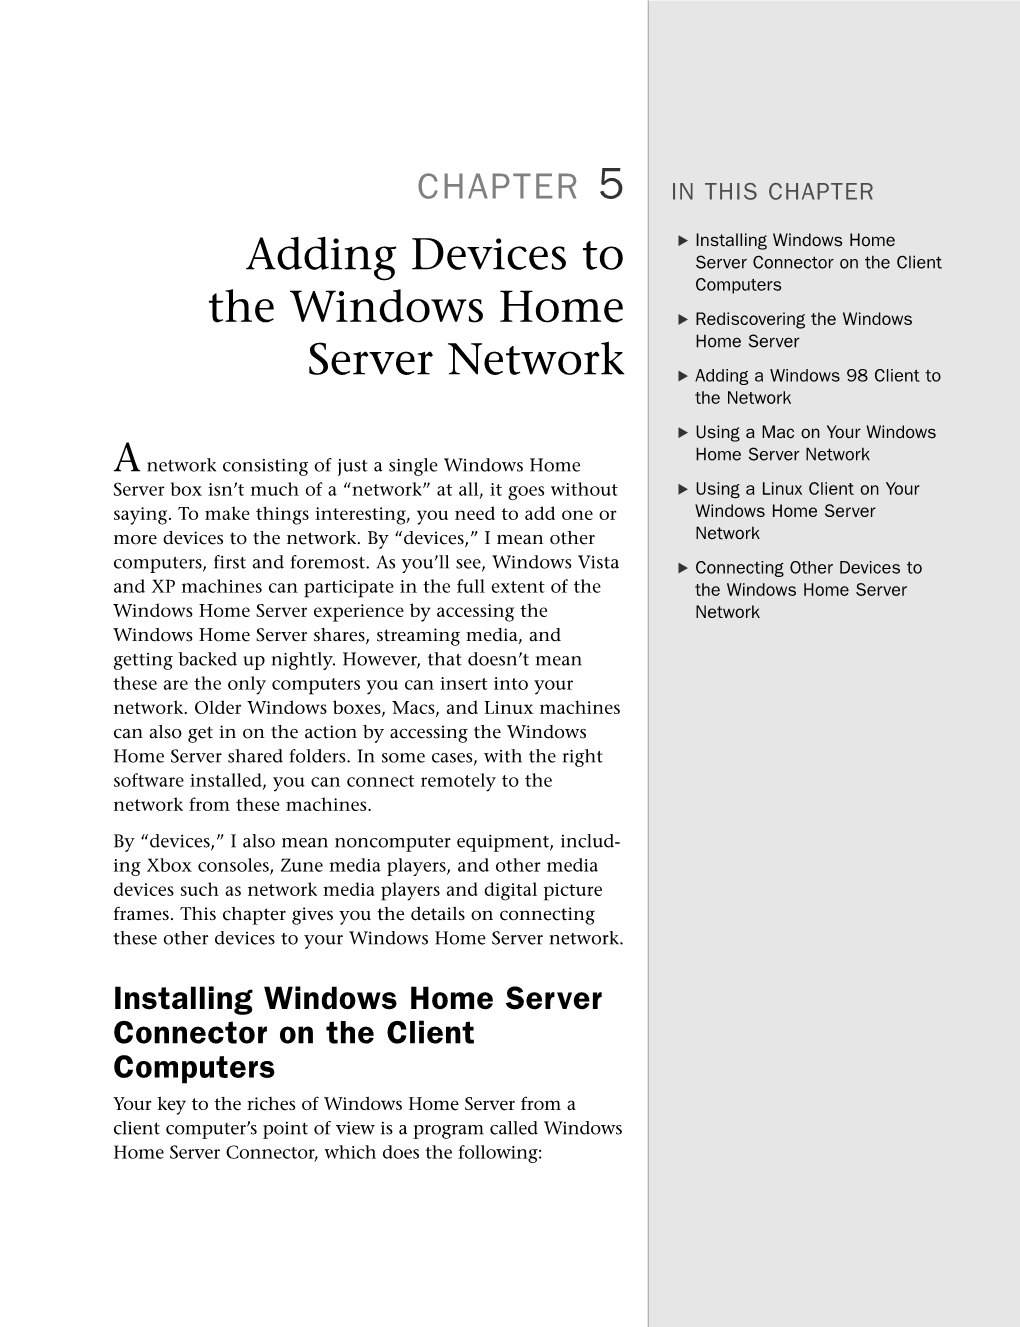 Adding Devices to the Windows Home Server Network